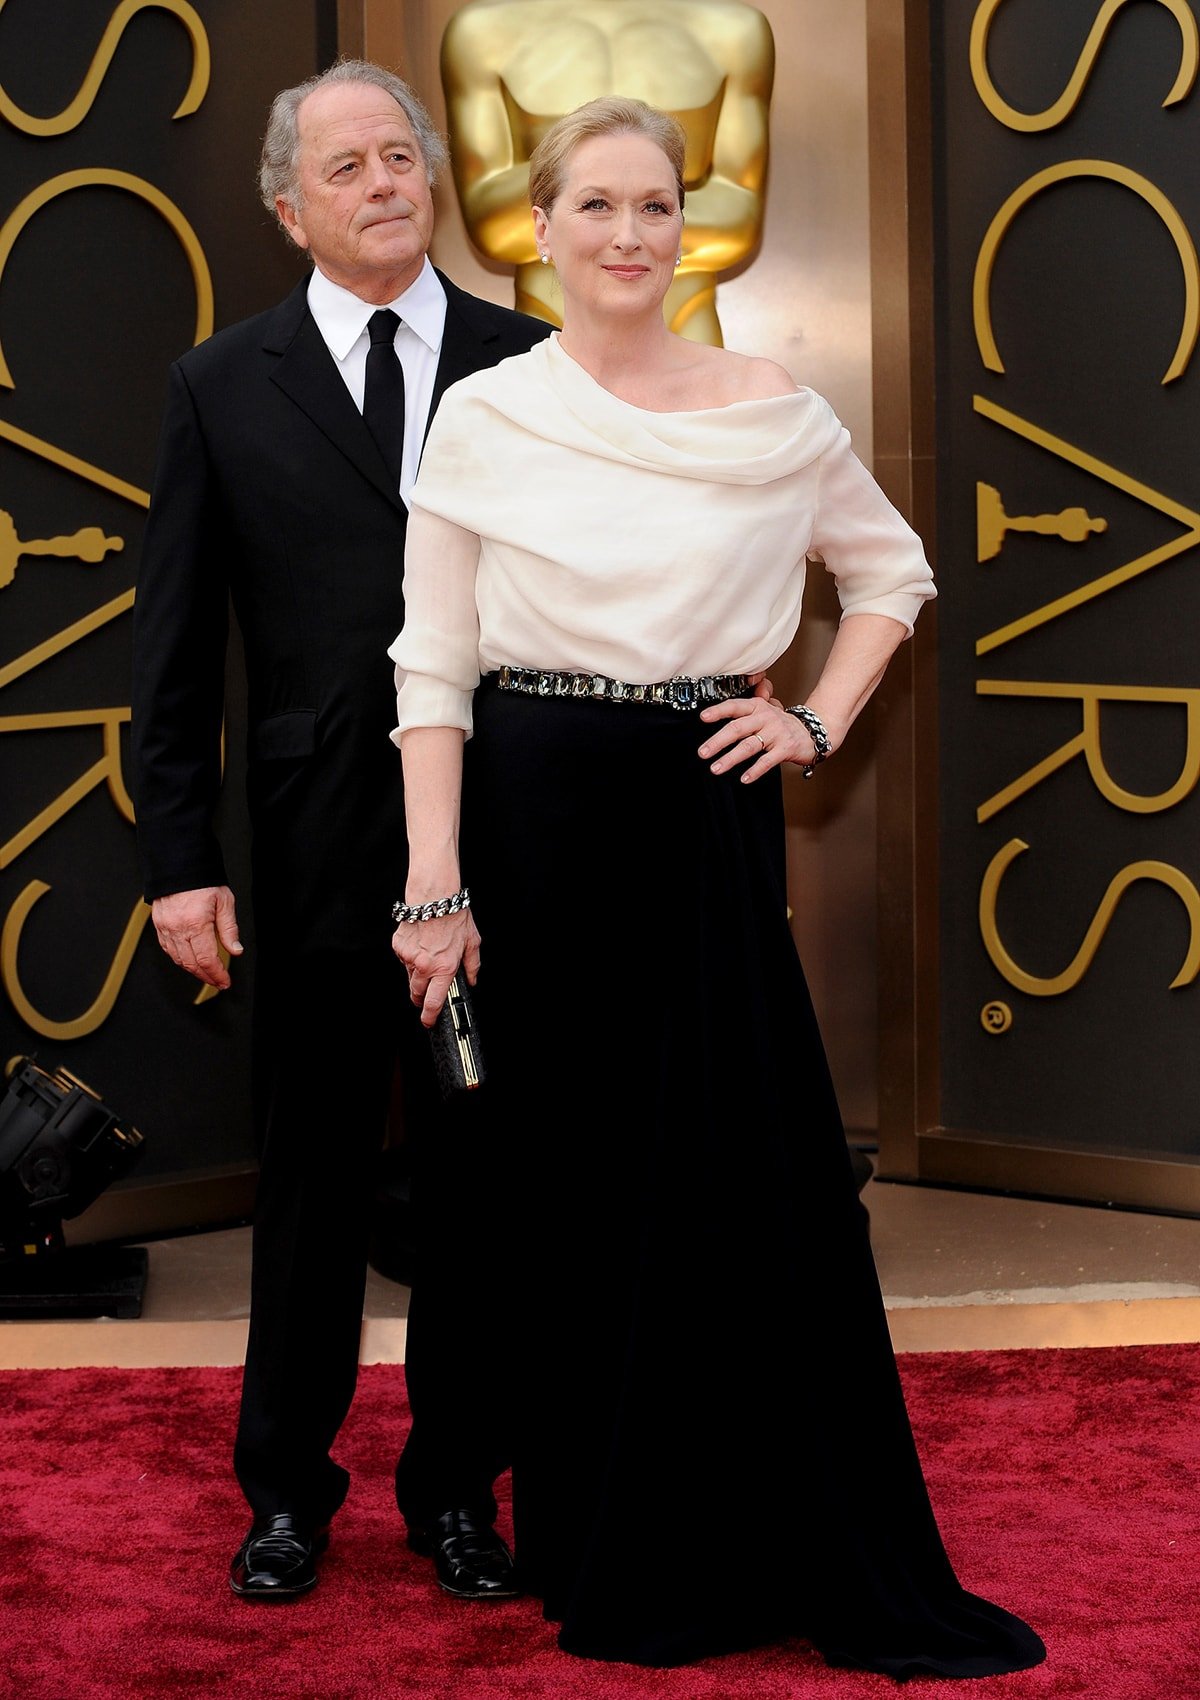 Meryl Streep and her husband of 45 years Don Gummer, pictured at the 2014 Oscars, have reportedly been separated for more than six years